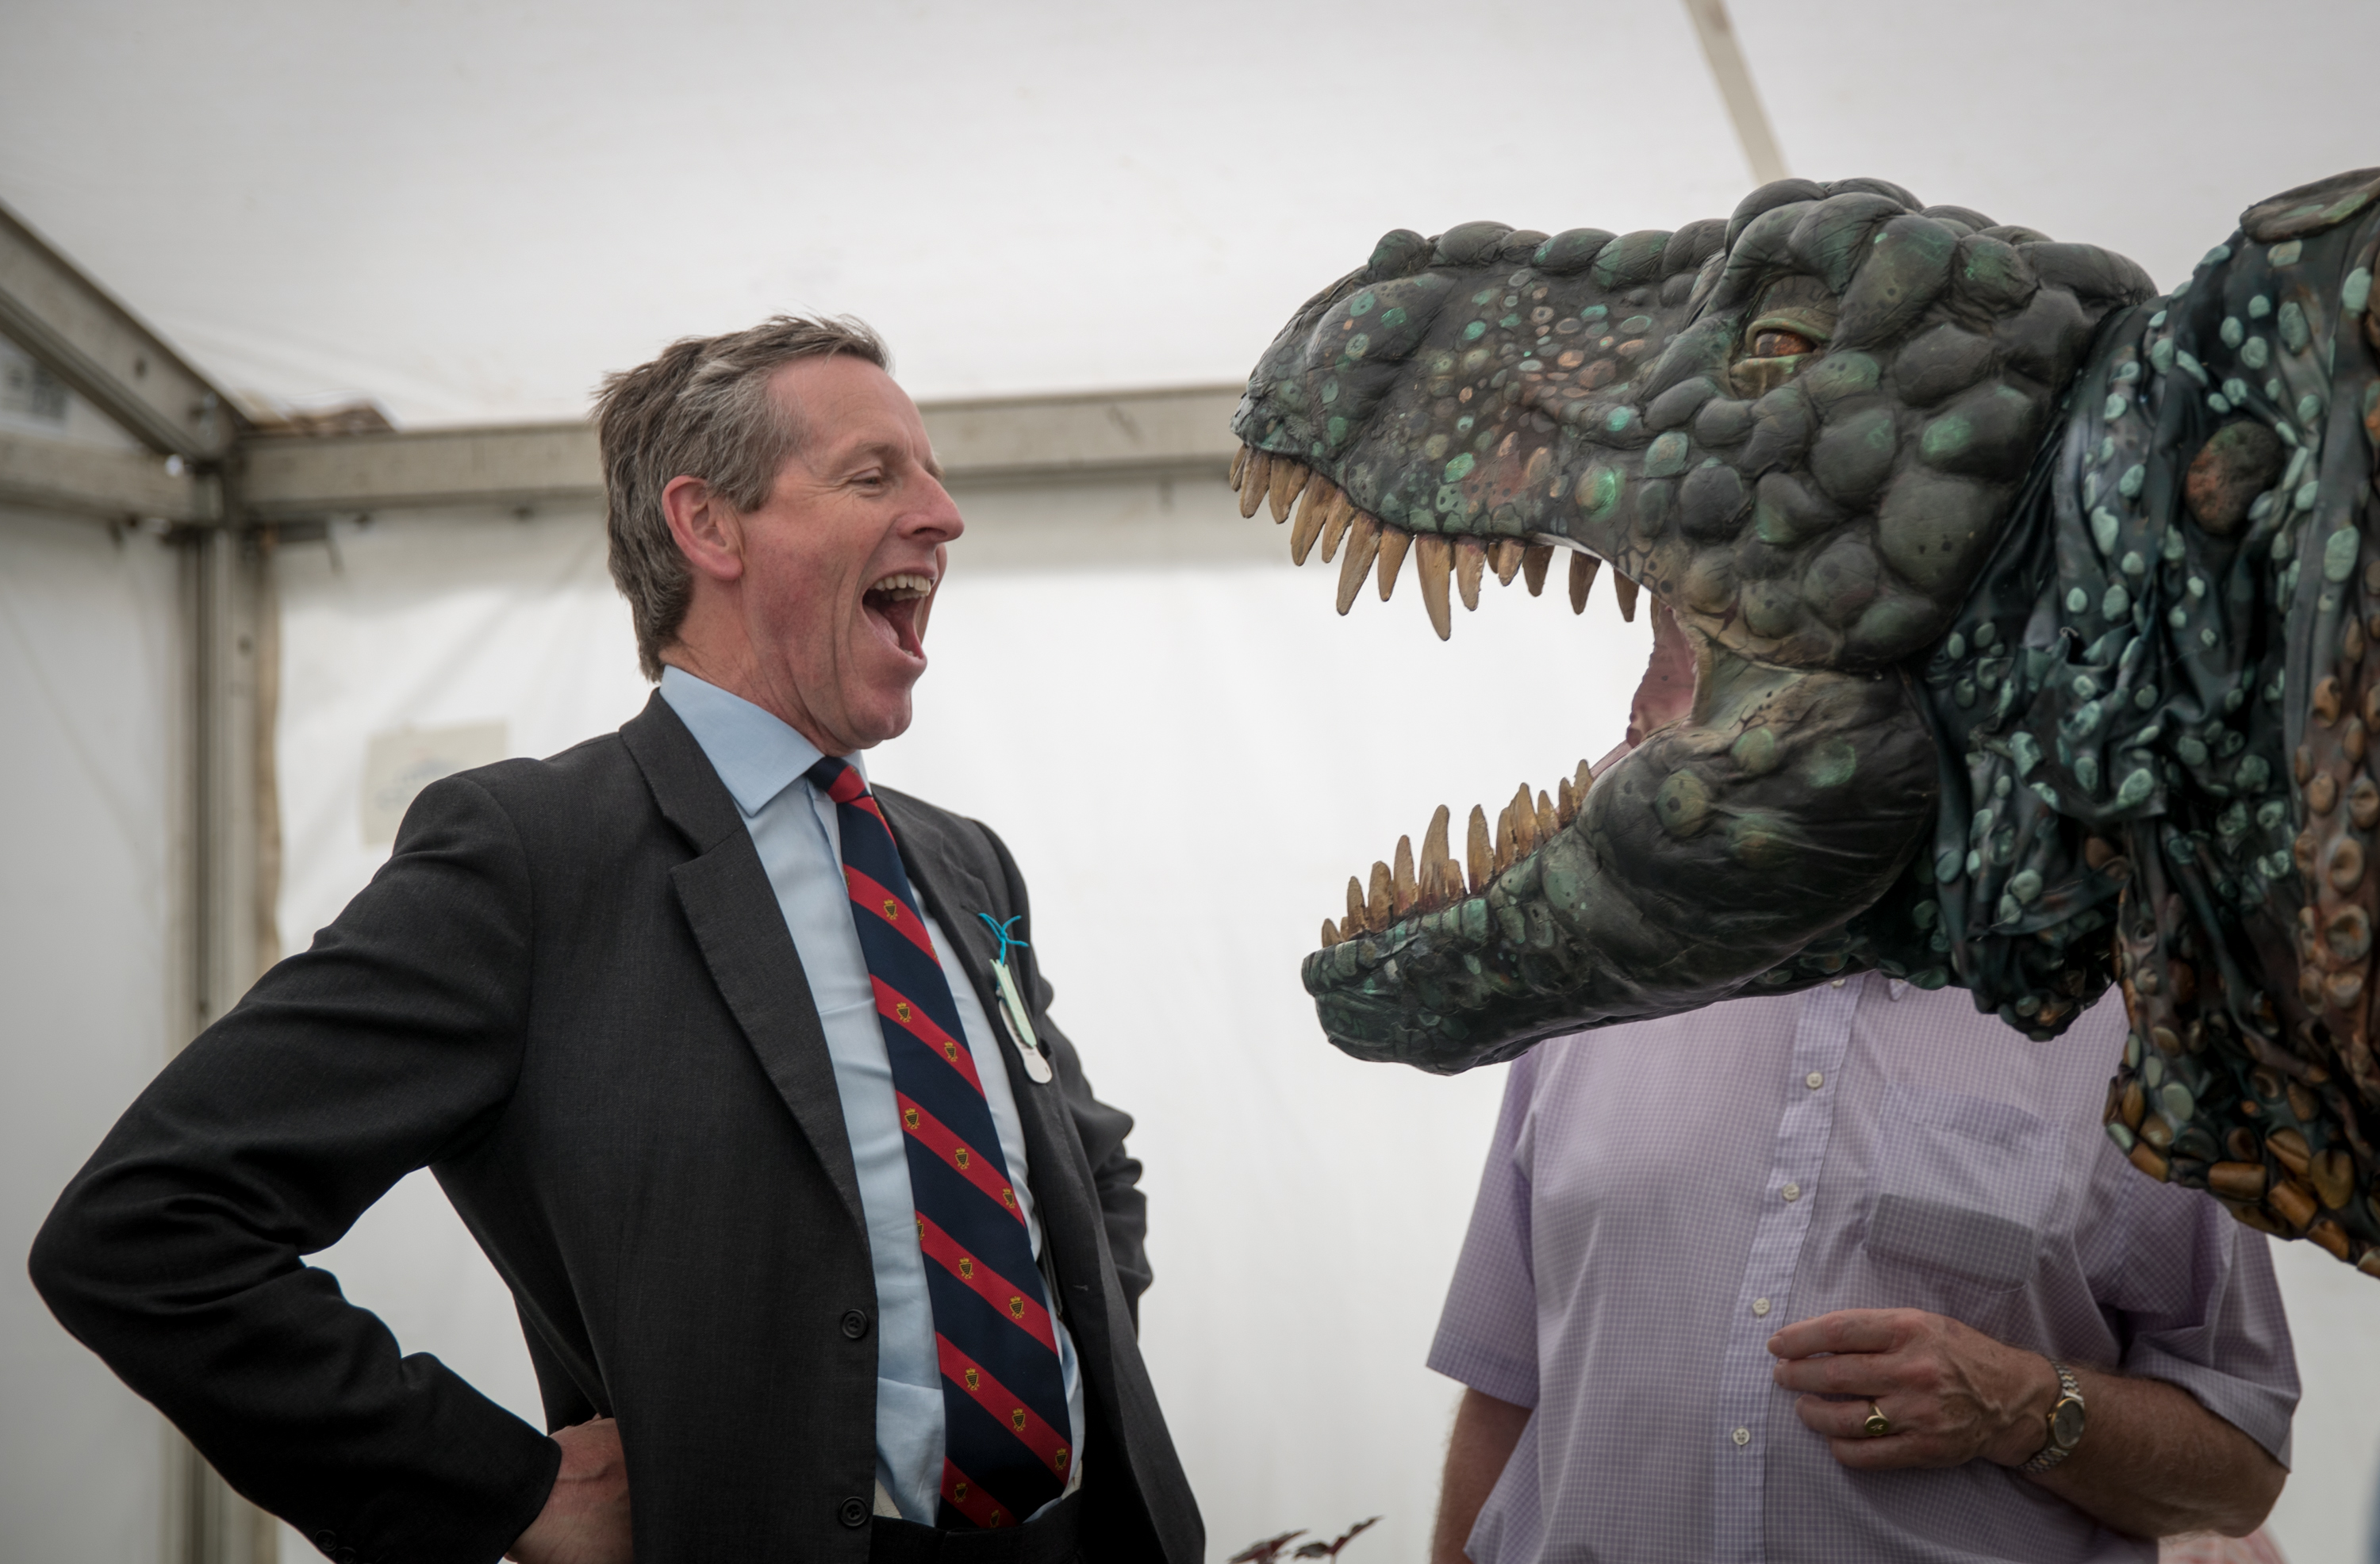 A man reacts to the Eden Project's life-size juvenile Tyrannosaurus rex that has been brought as a preview to the nearby attraction's "Dinosaur Uprising" opening this summer on June 9, 2016 near Wadebridge, England.